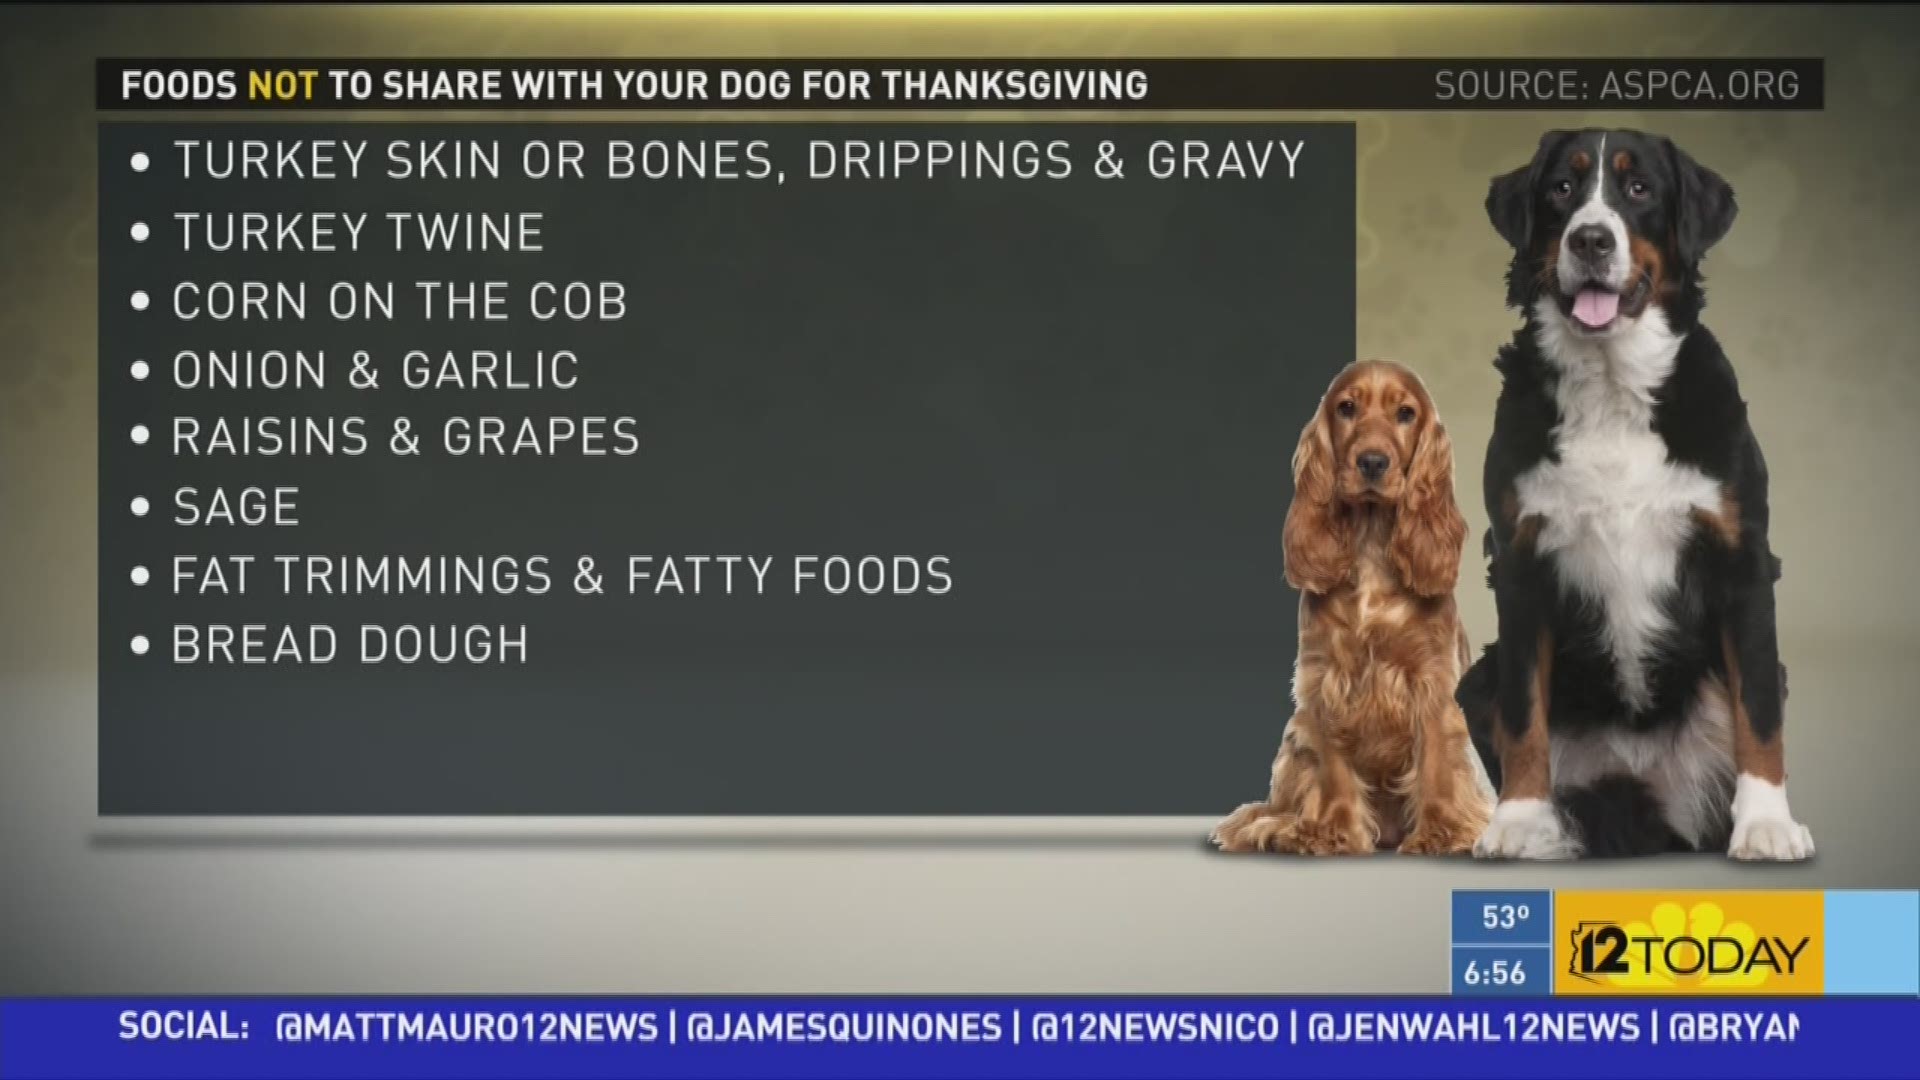 Food you shouldn't share with your dog for Thanksgiving.